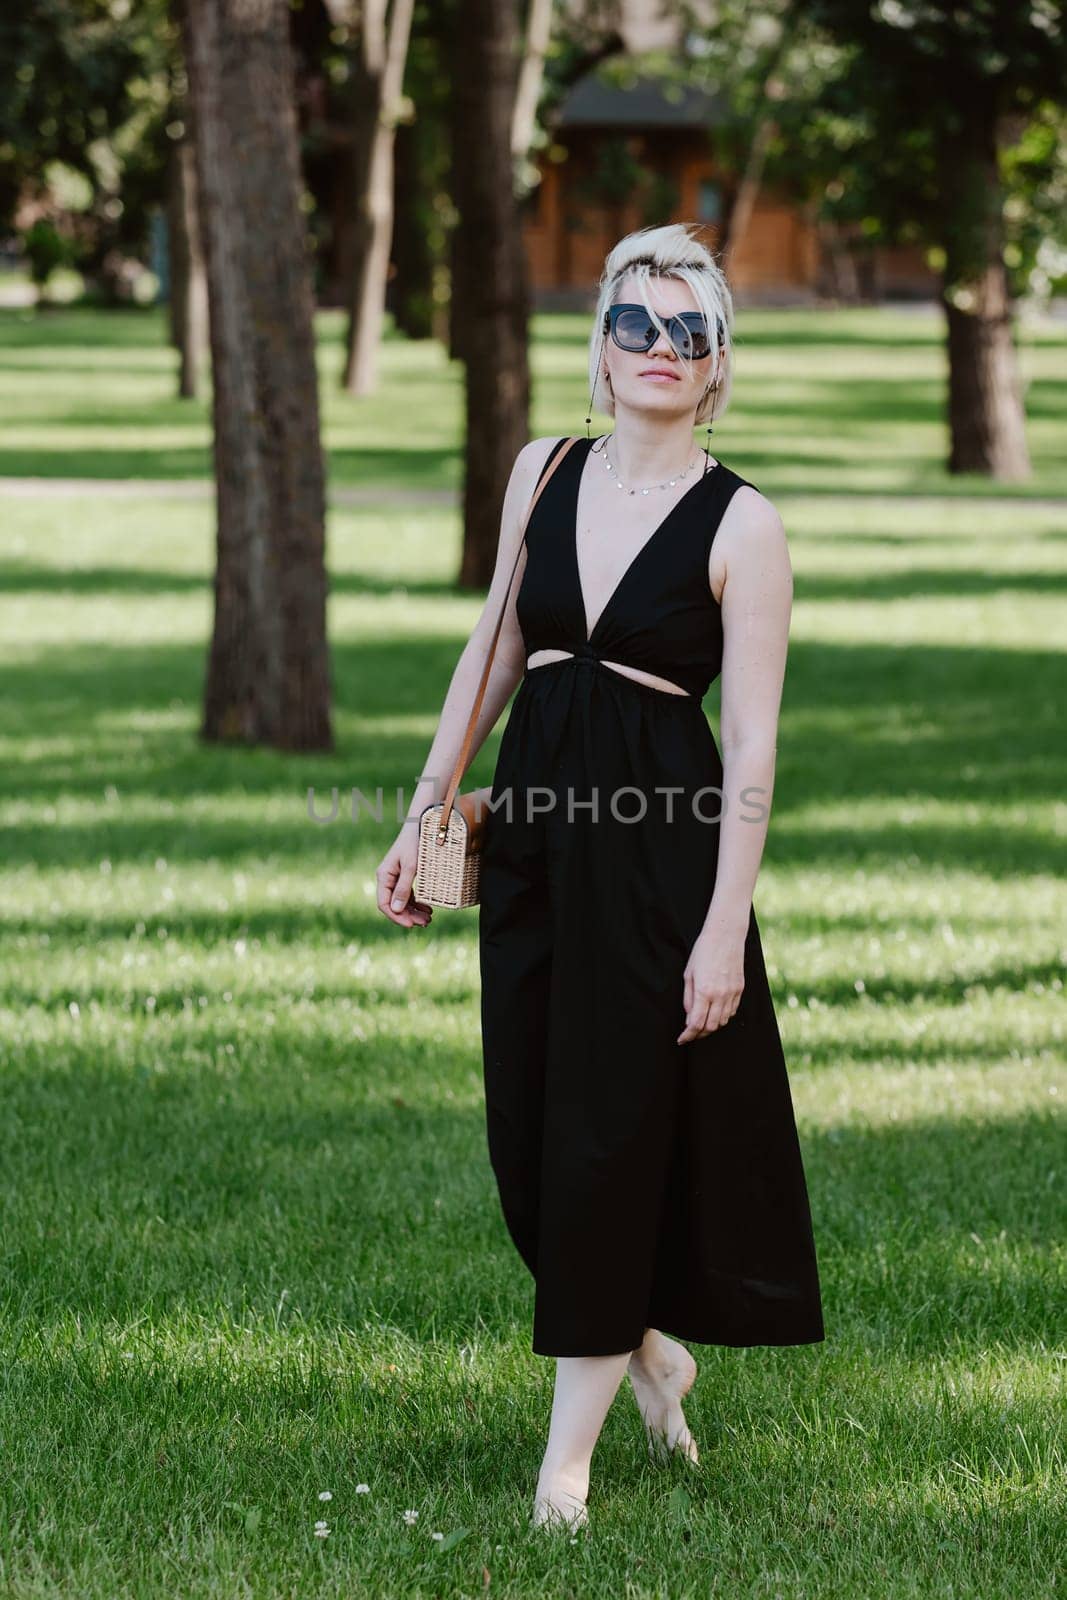 Young blond woman with short hair stands at full height in a park wearing sunglasses and black dress